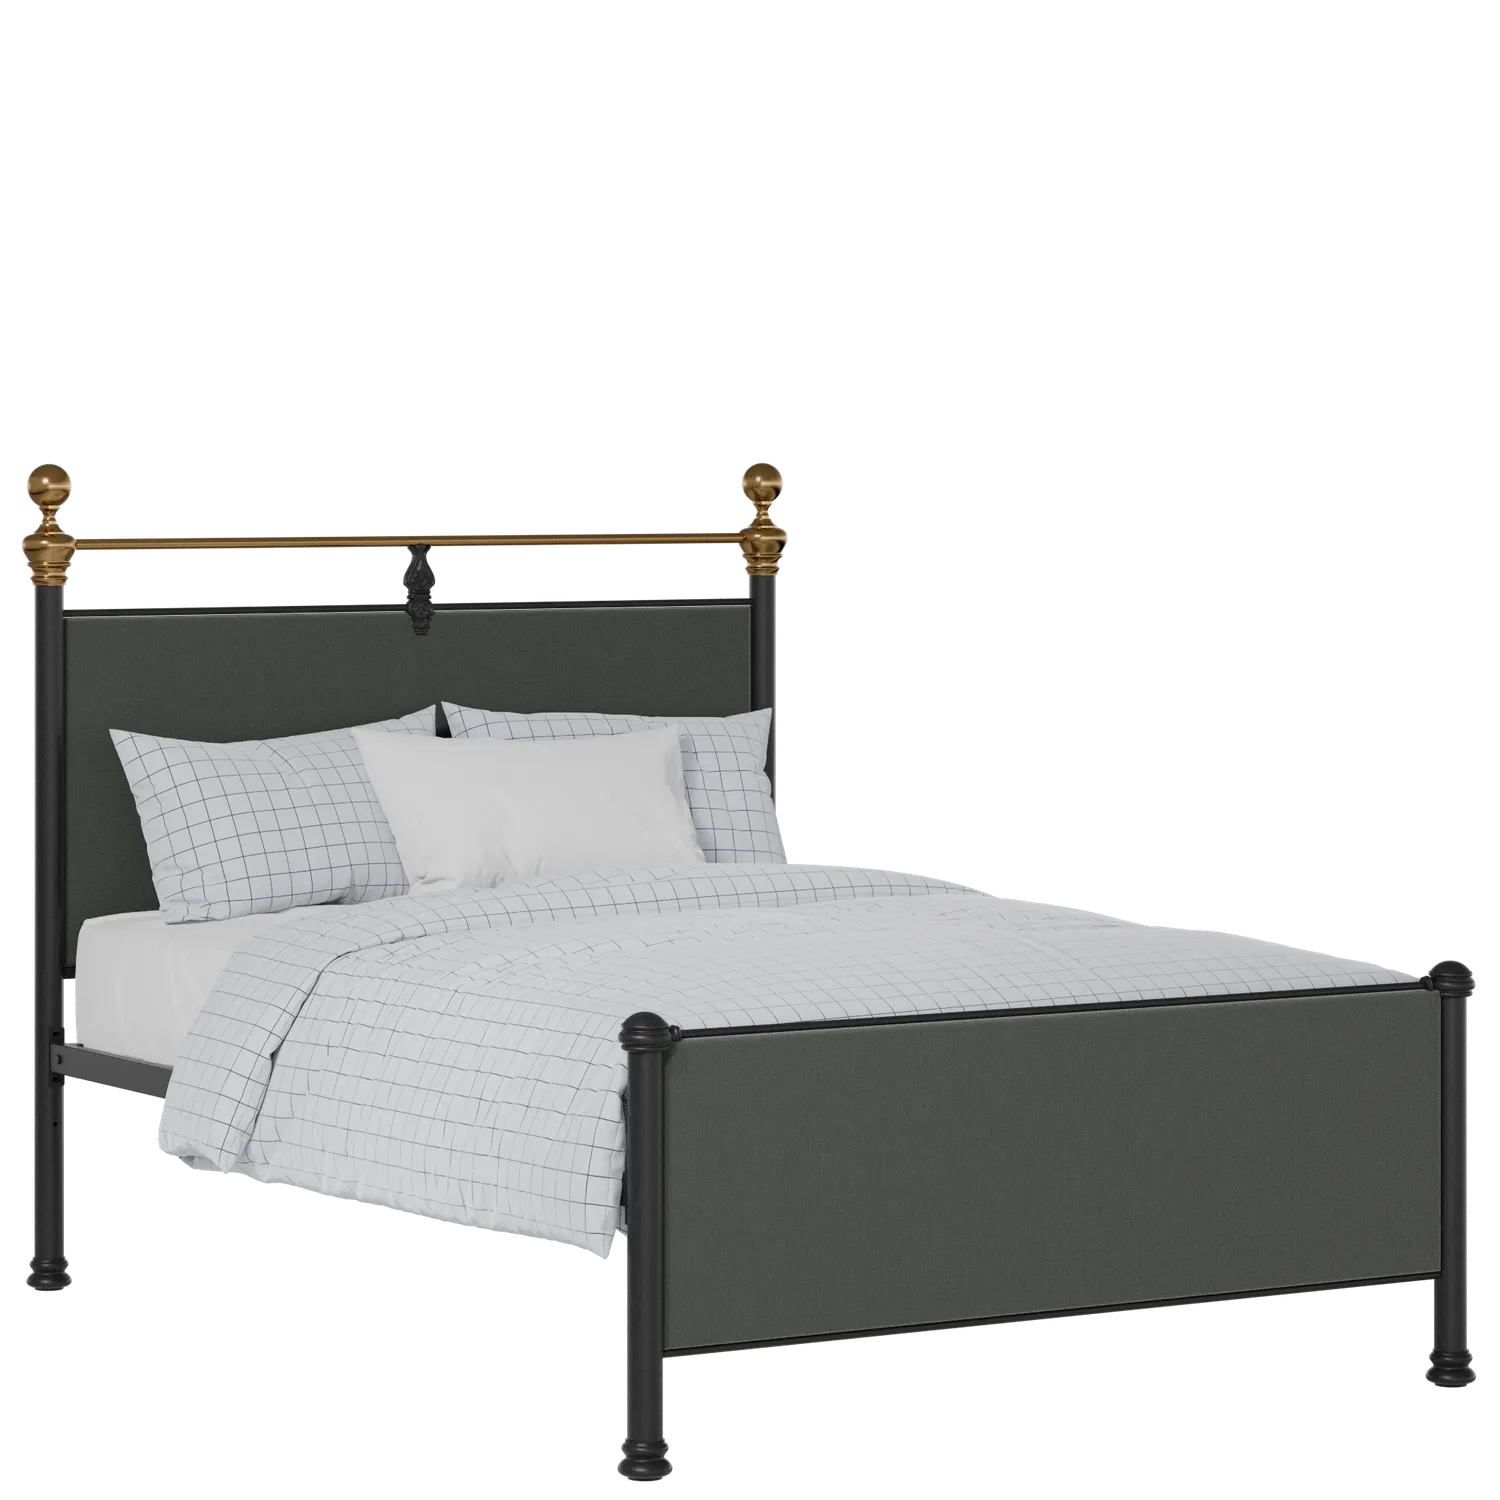 Bastille iron/metal upholstered bed in black with iron fabric